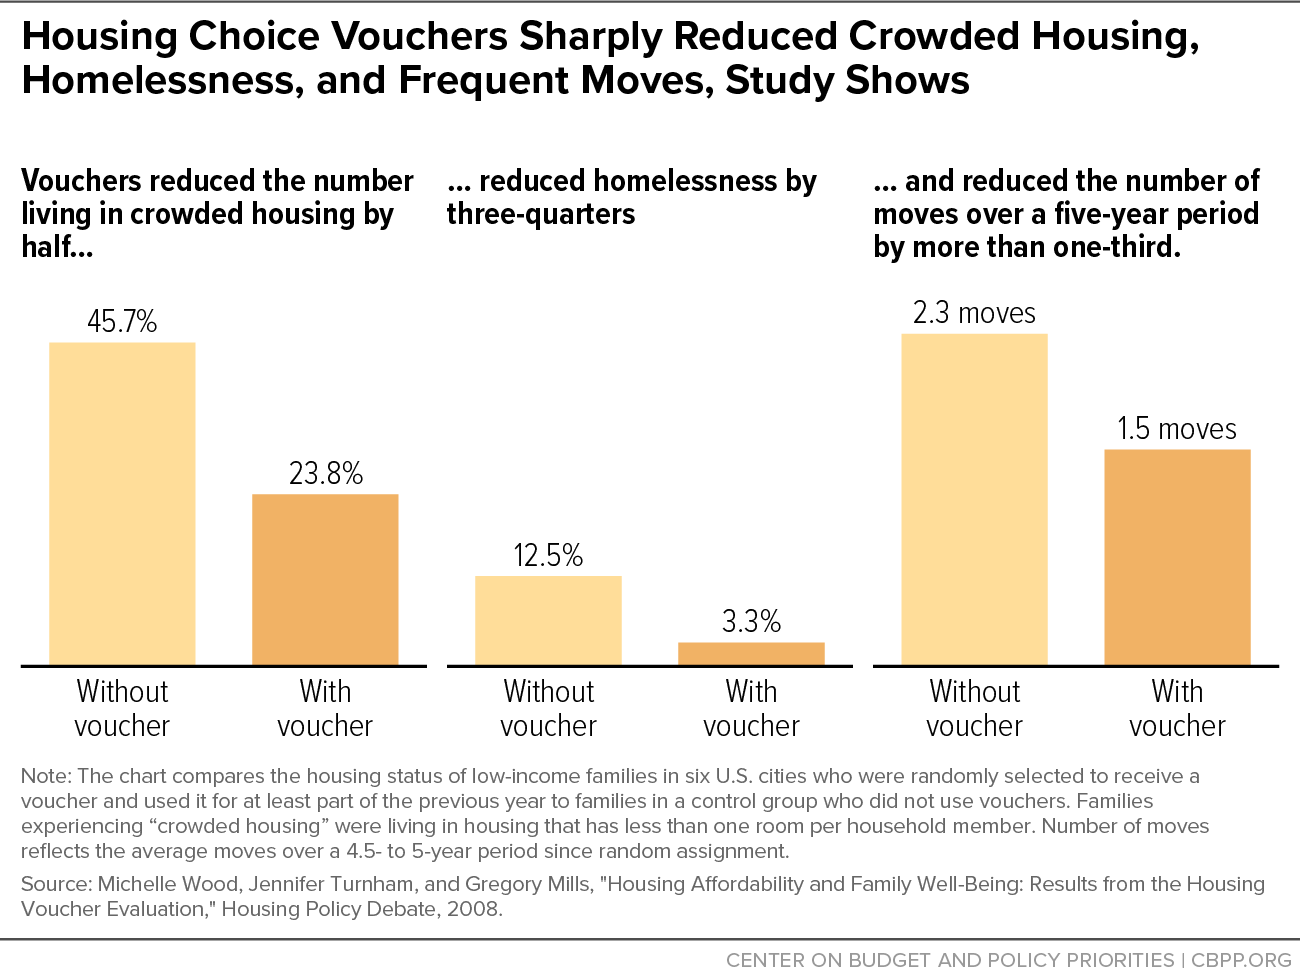 Housing Choice Vouchers Sharply Reduced Crowded Housing, Homelessness, and Frequent Moves, Study Shows